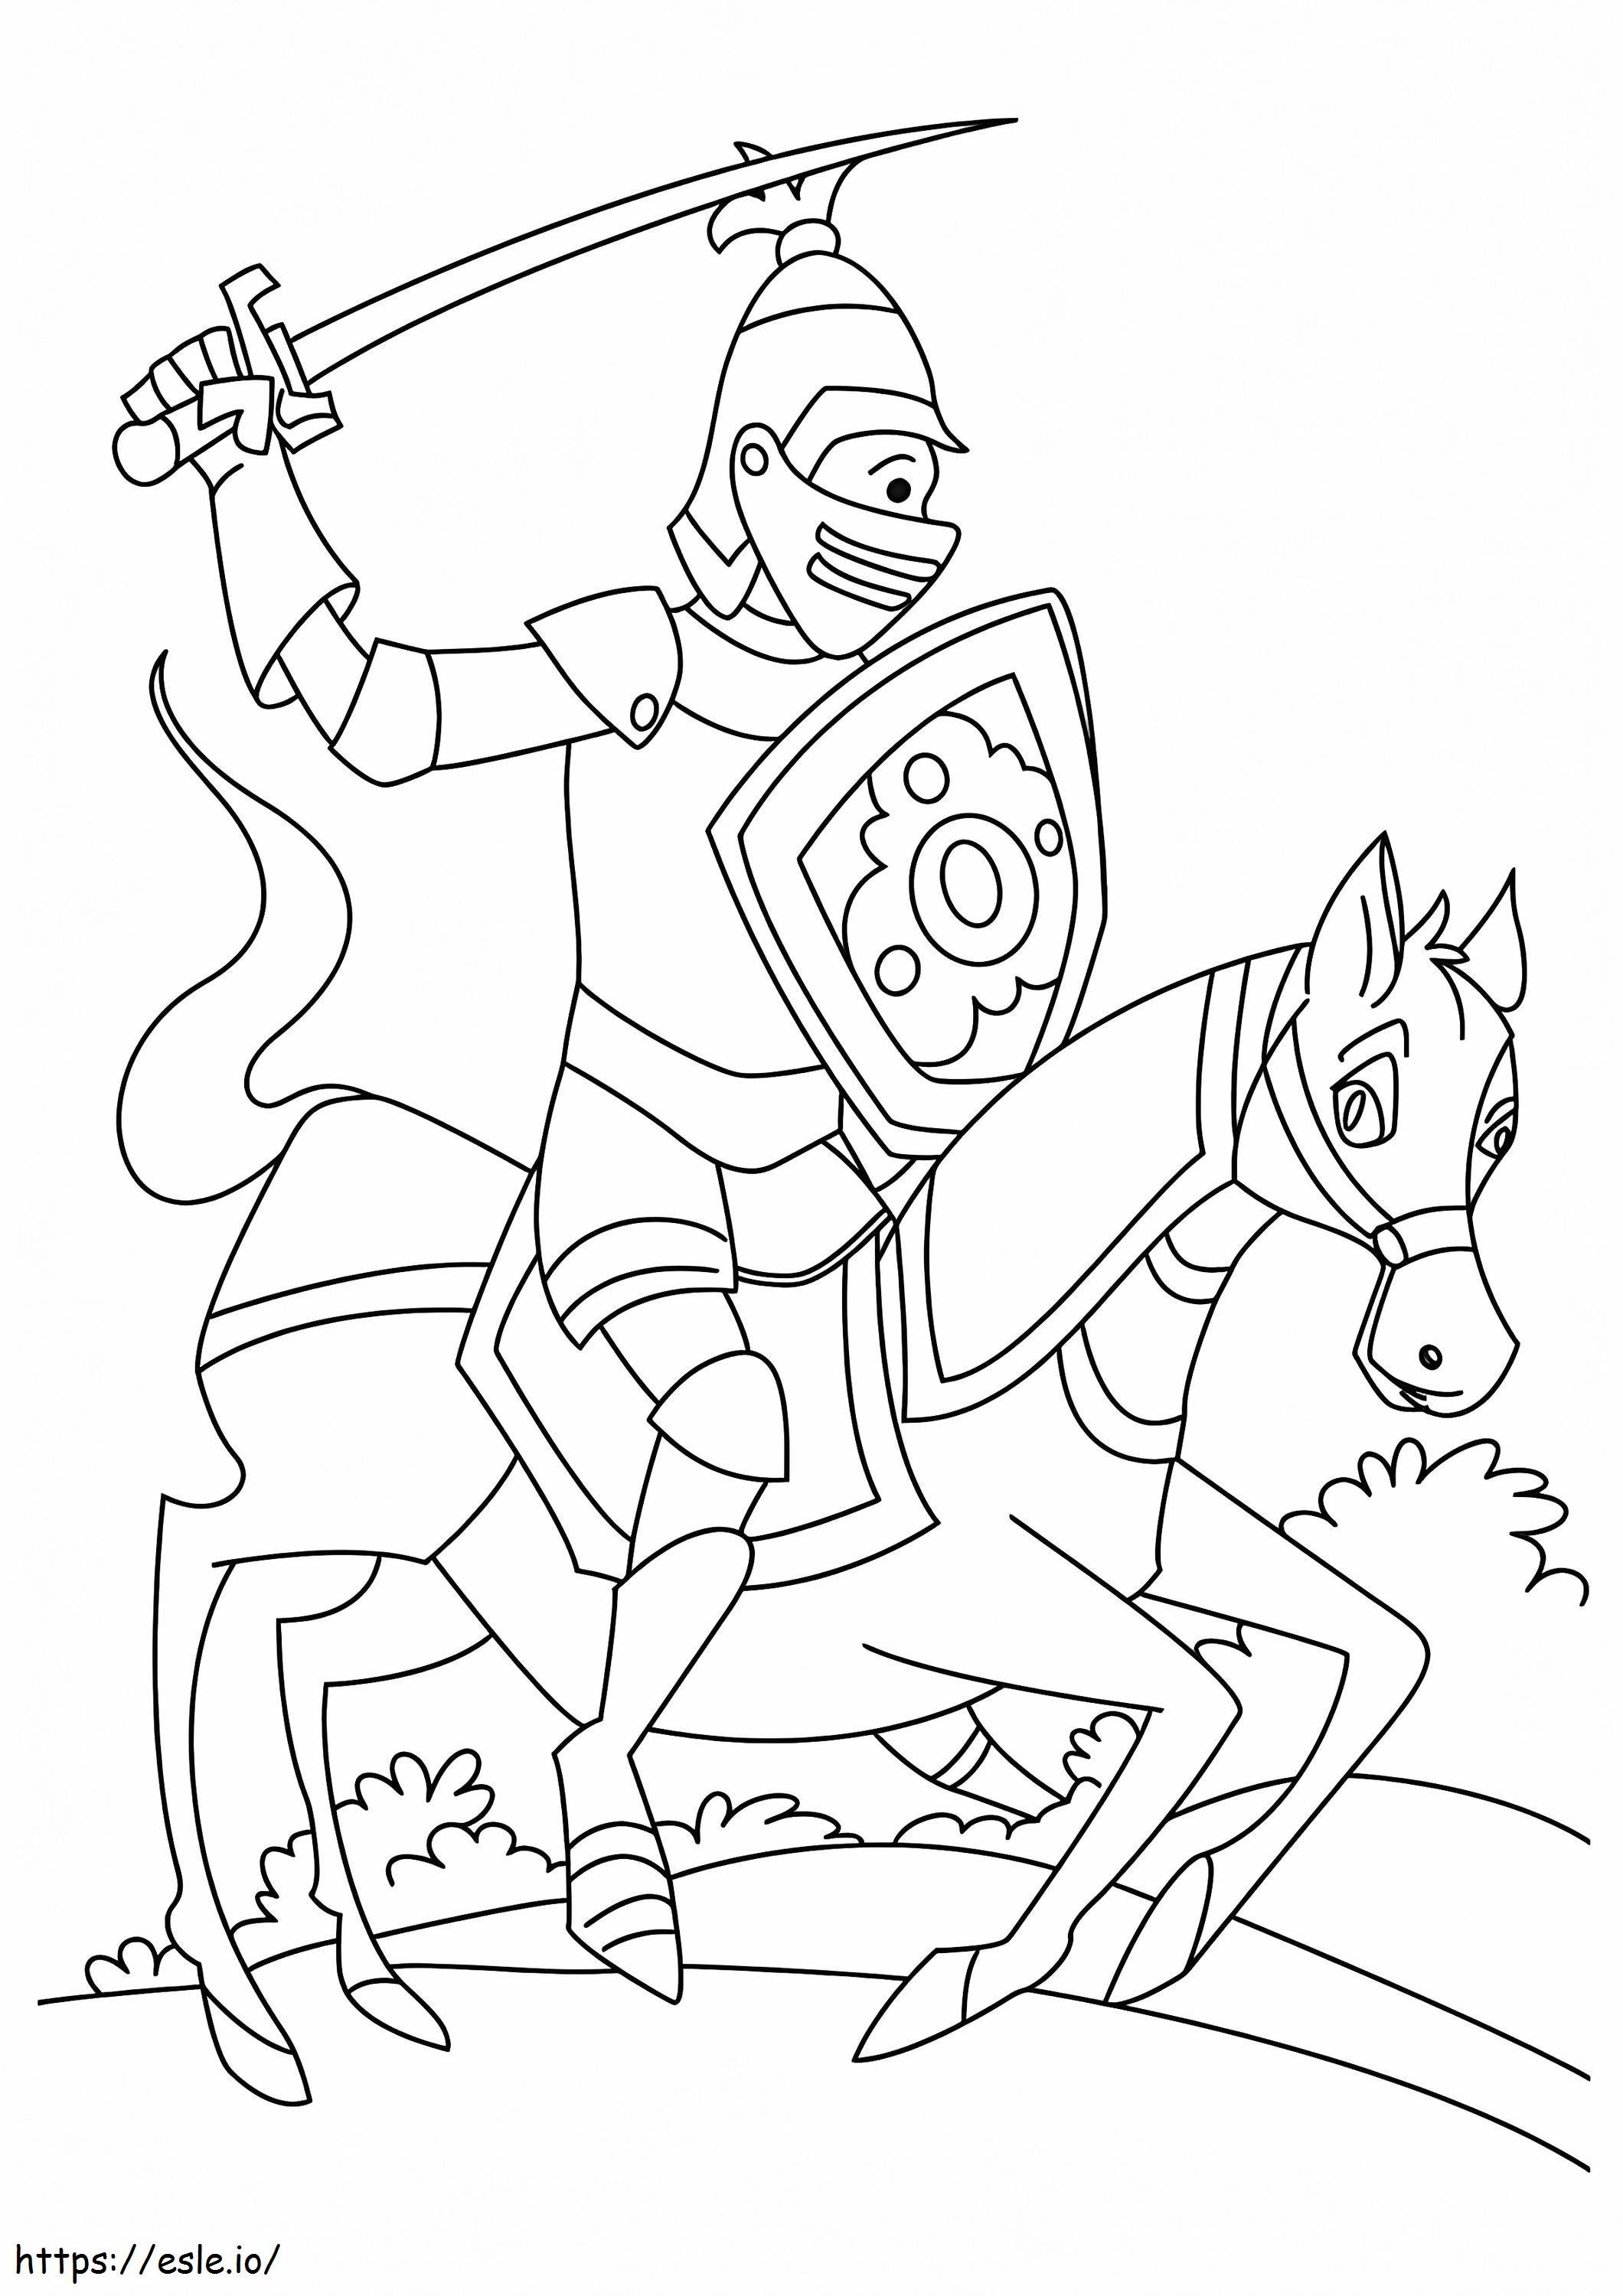 1526721447 Knight On A Horse A4 coloring page